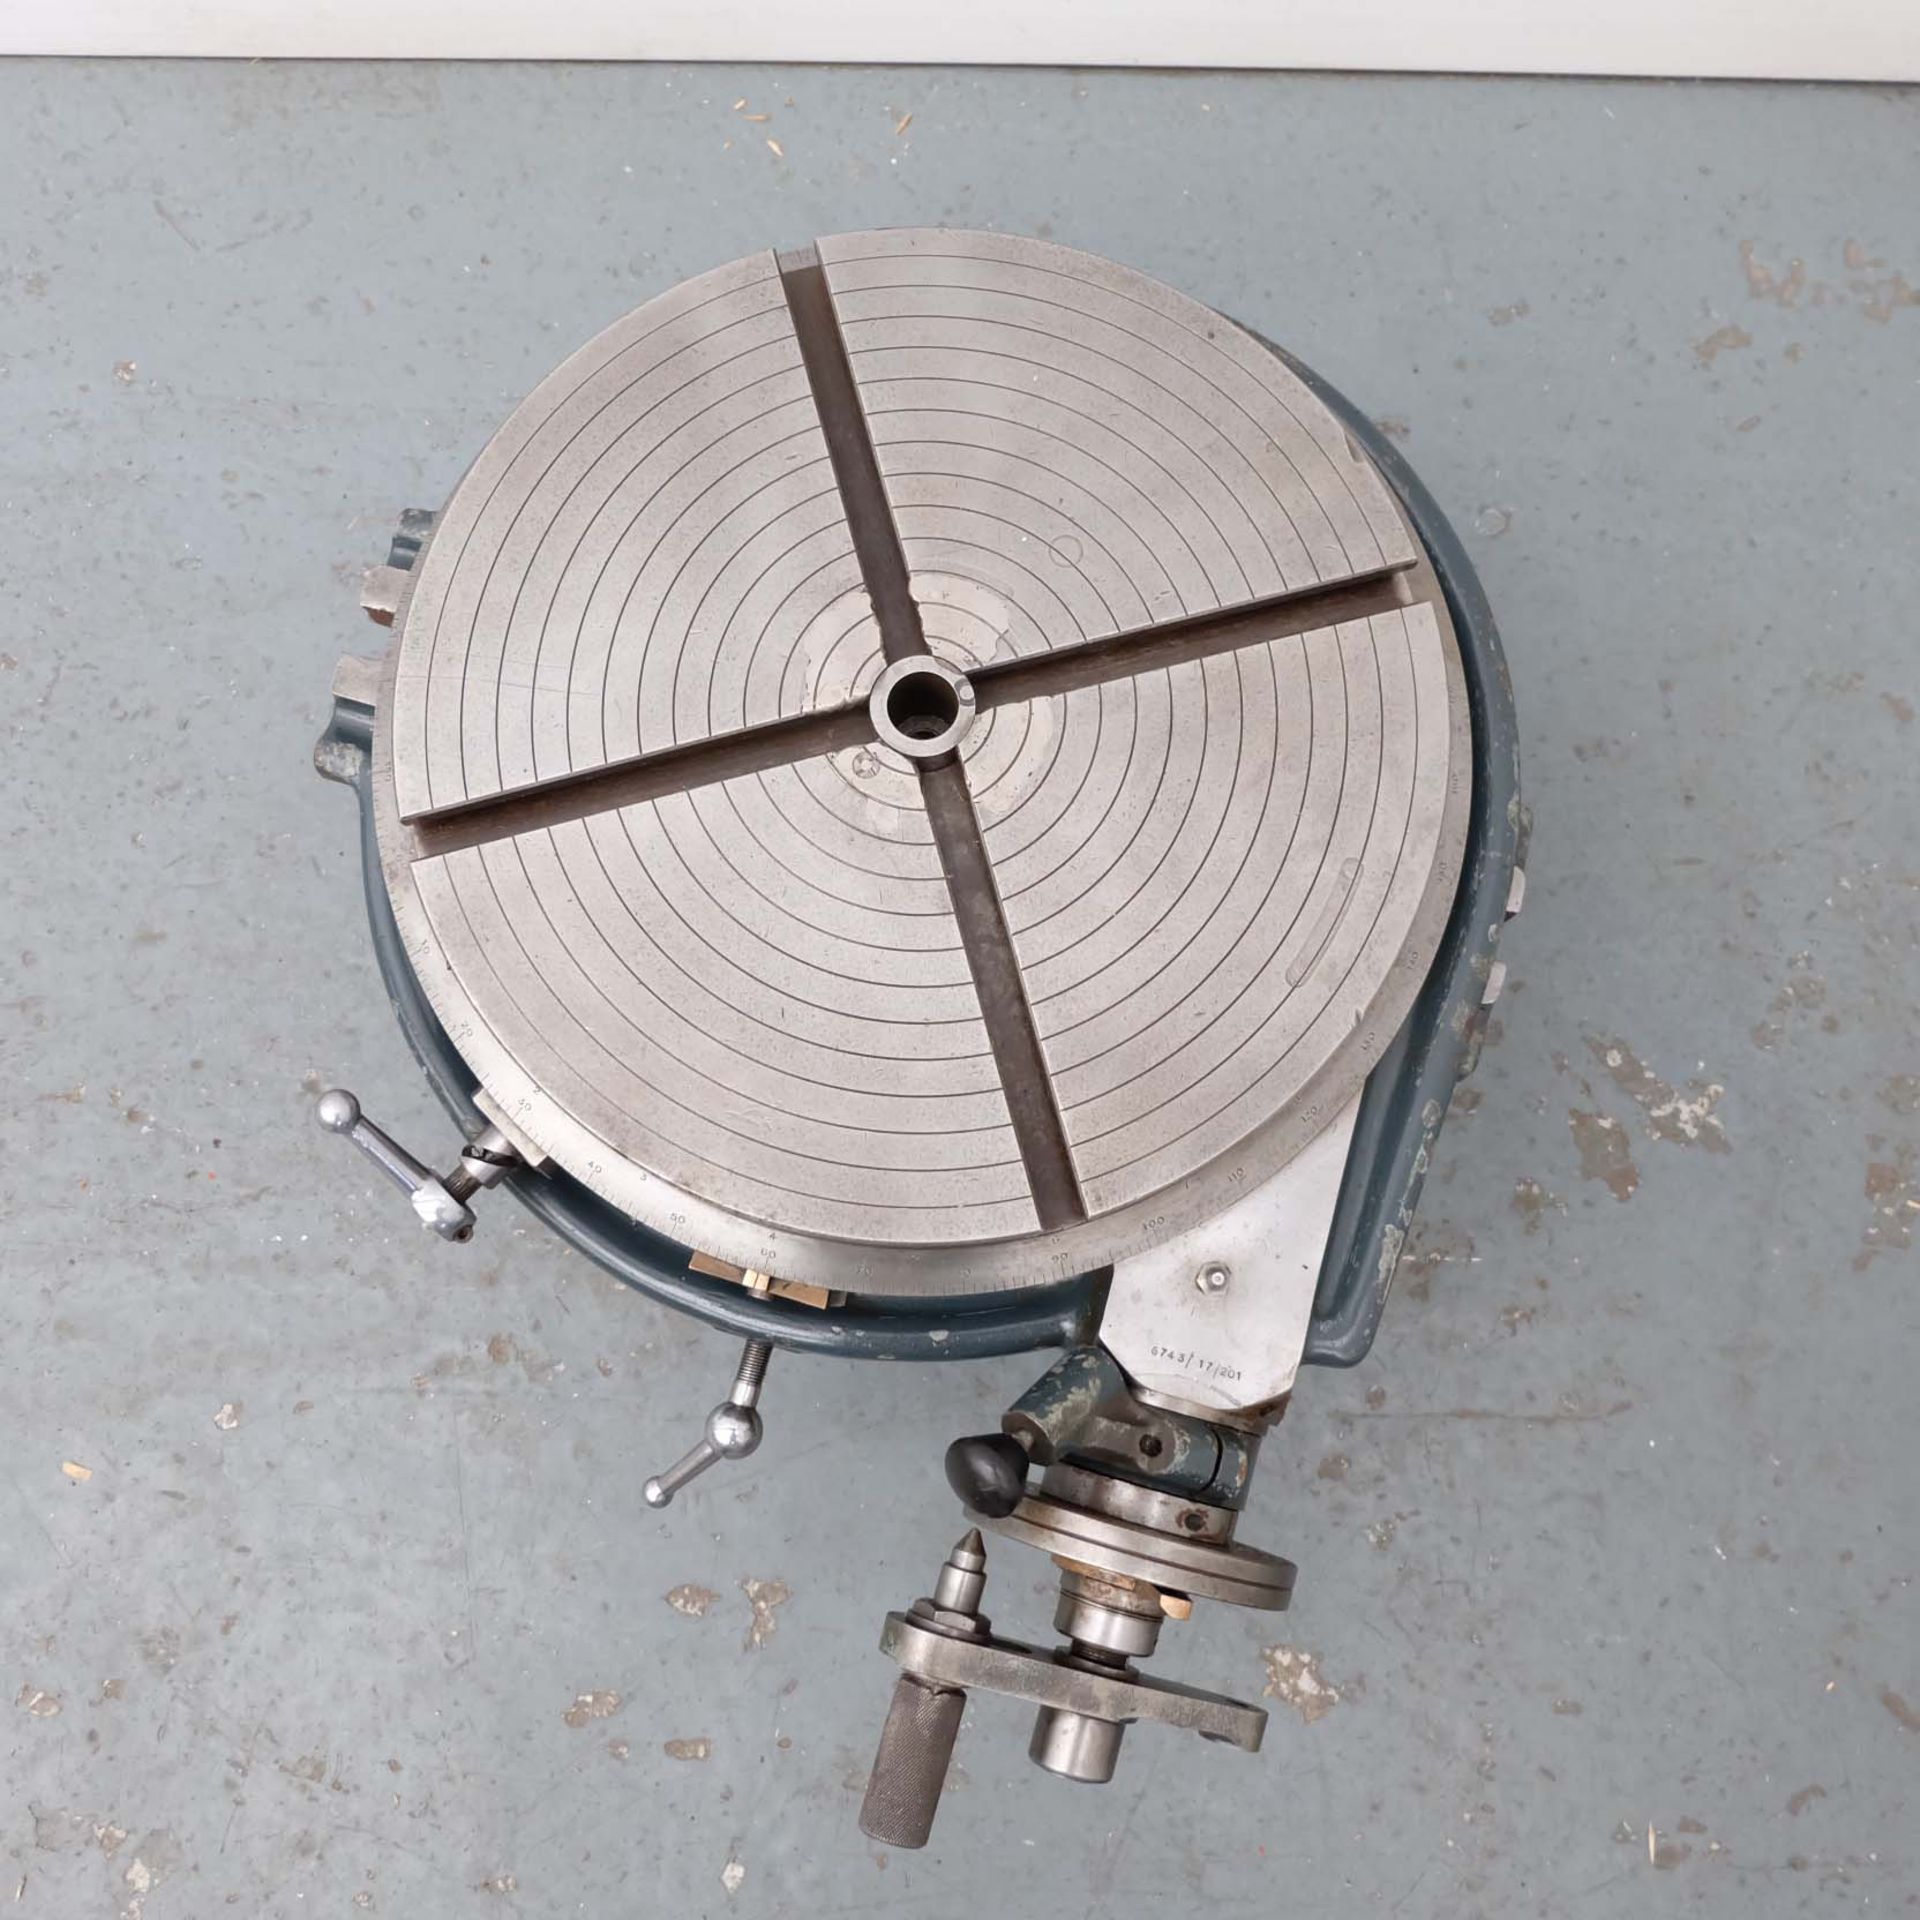 Elliott 15" Rotary Table With Two Dividing Plates. - Image 2 of 6